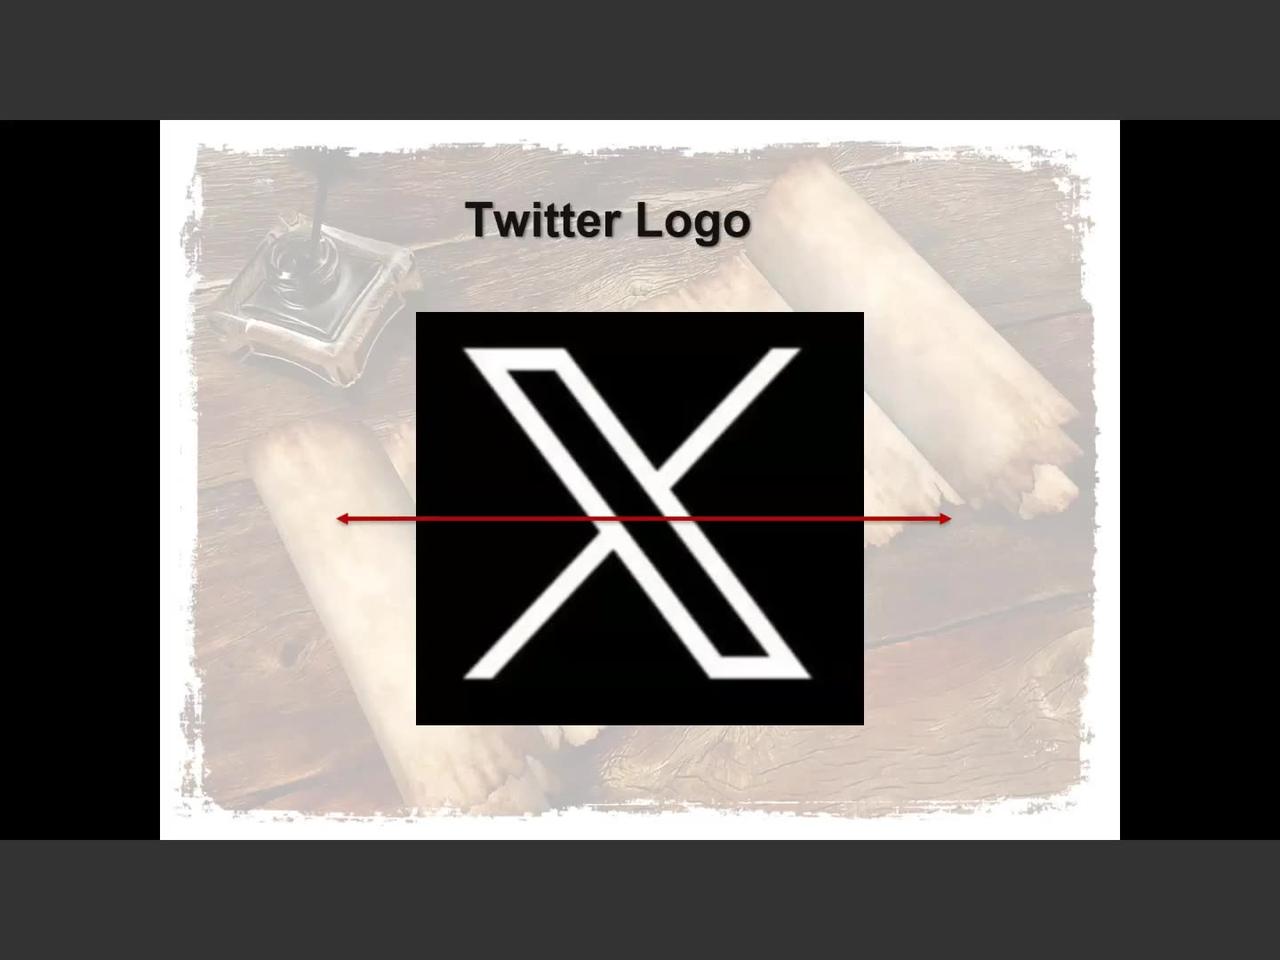 The Hidden Secret of The New "X" Twitter Logo, Threads, TikTik, Meta They Don't Want You to Know